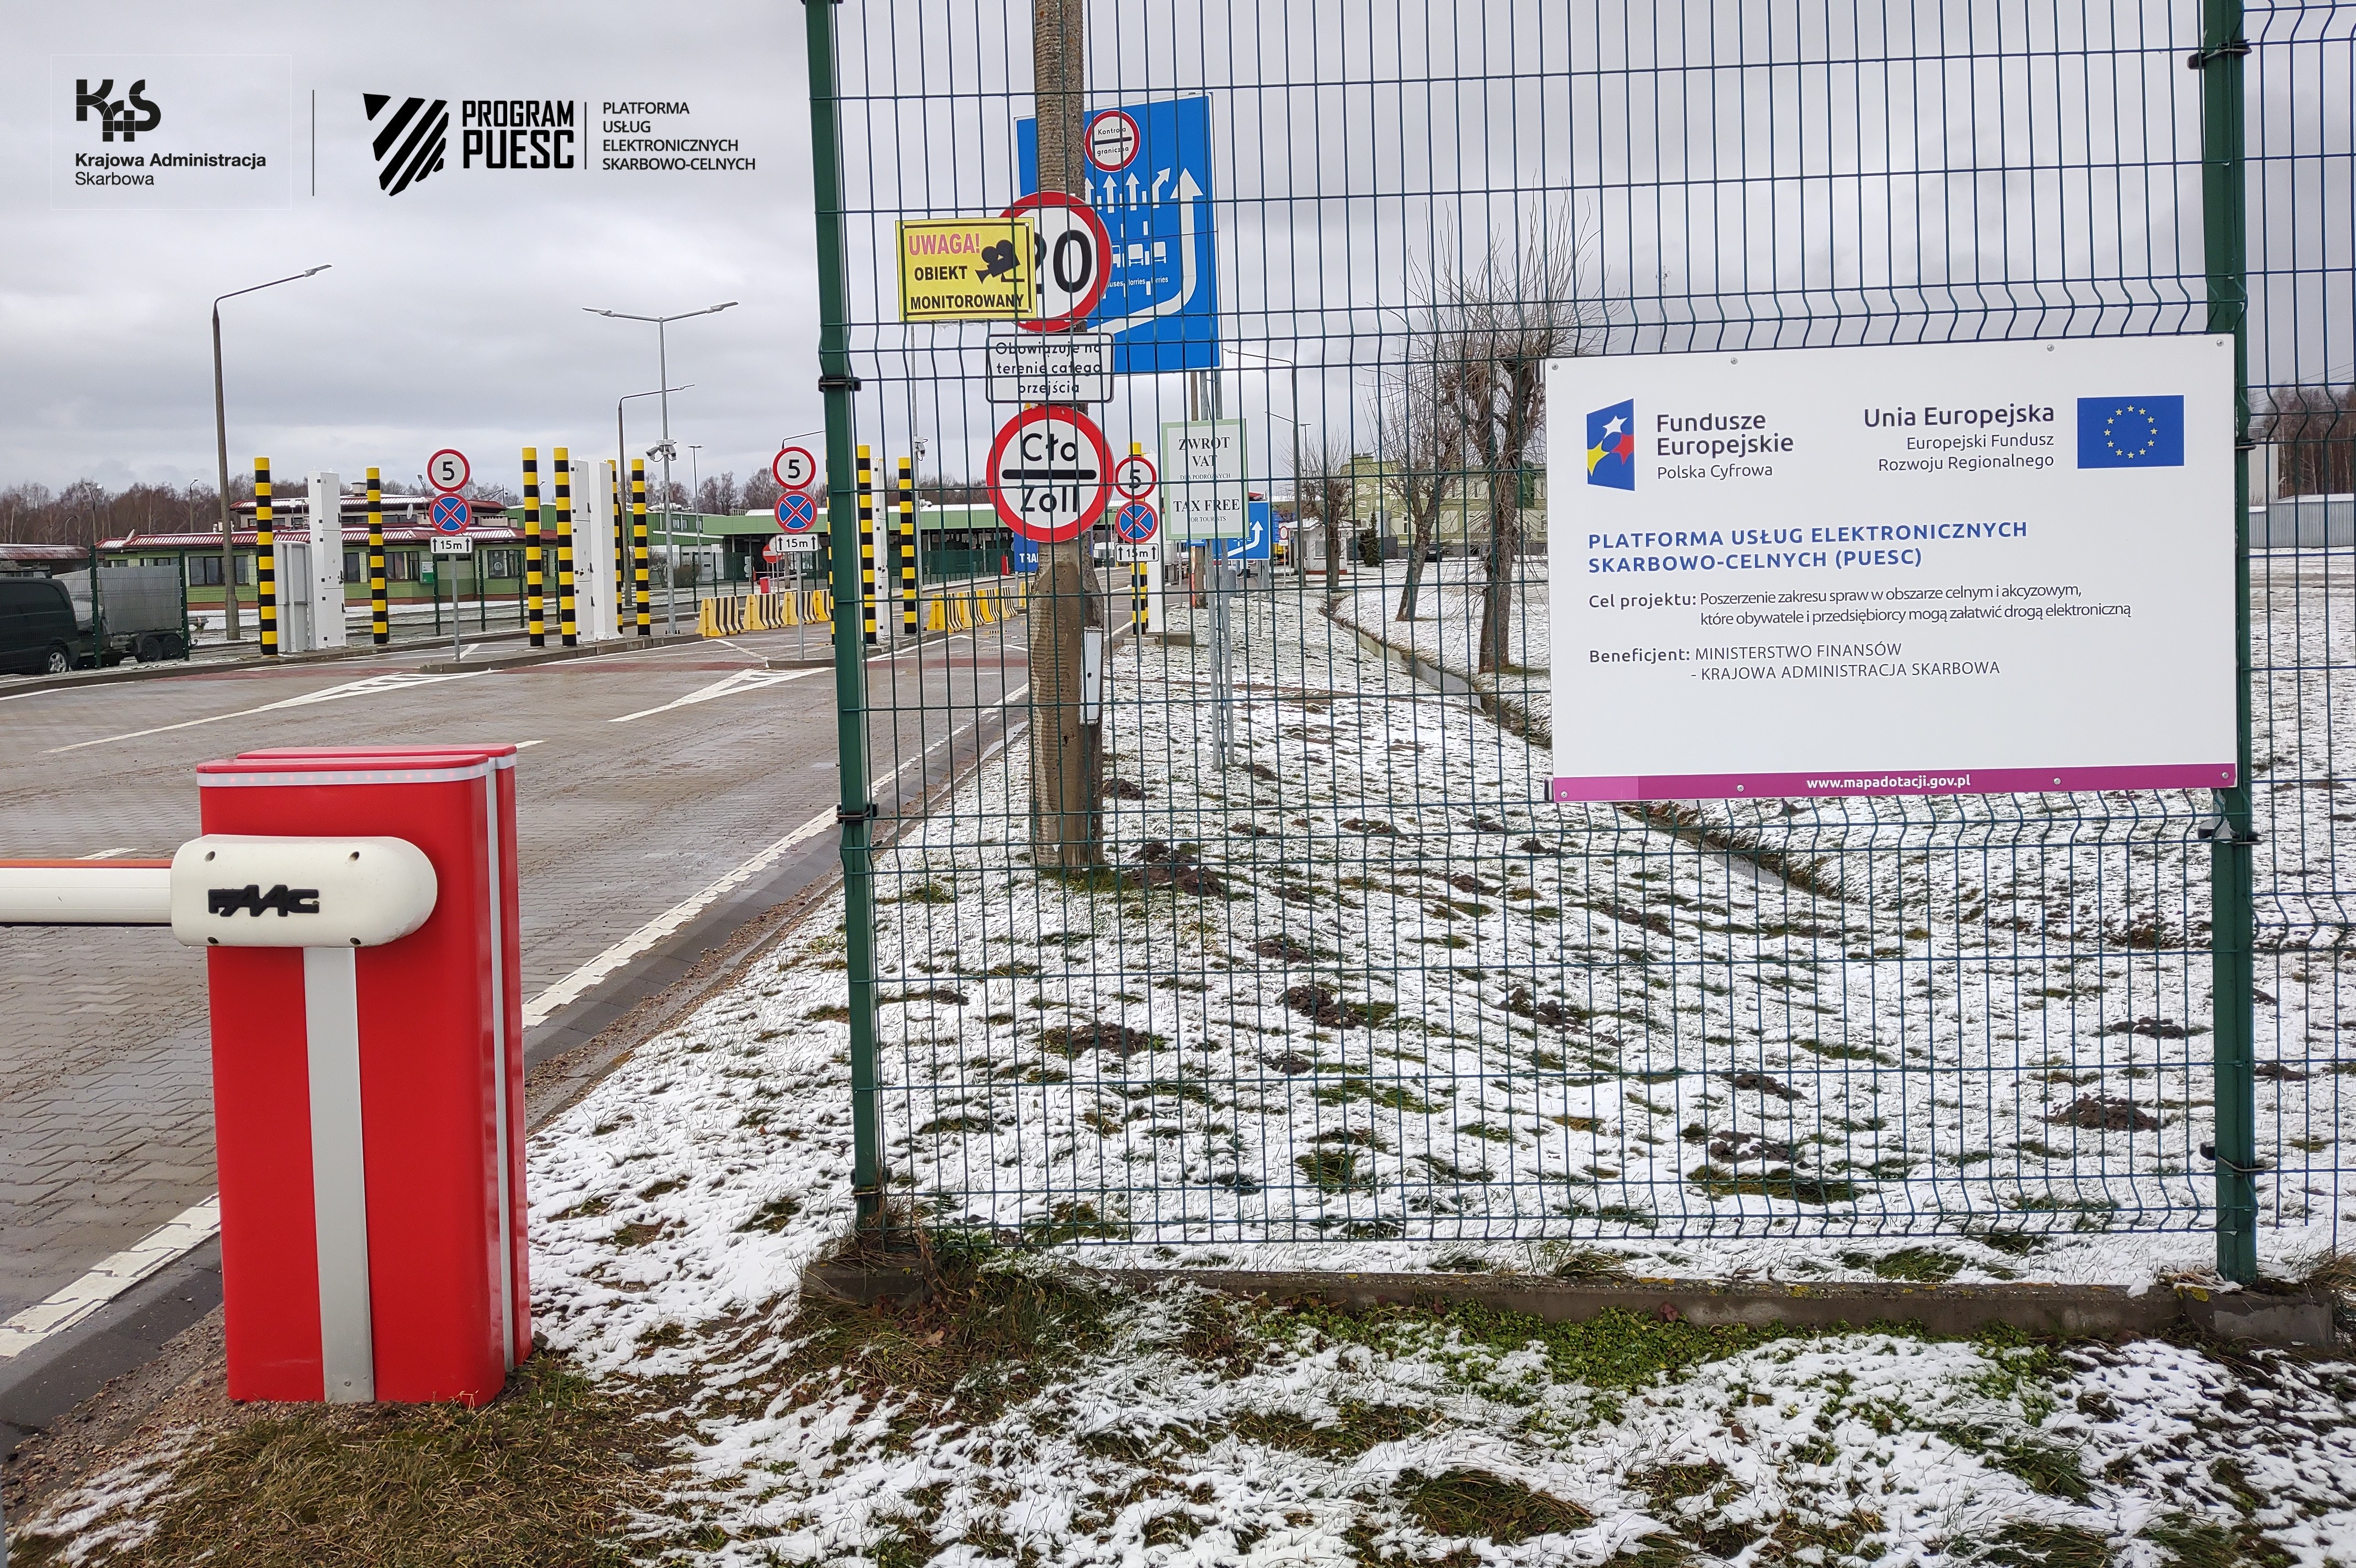 On the right side you can see a metal fence with a board informing about the PUESC Project, on which logos are placed: National Revenue Administration, European Funds, Digital Poland, Tax and Customs Information System, Ministry of Finance, European Union European Regional Development Fund. On the left, at the bottom, there is a barrier, in the background you can see yellow and black pillars and road lanes.